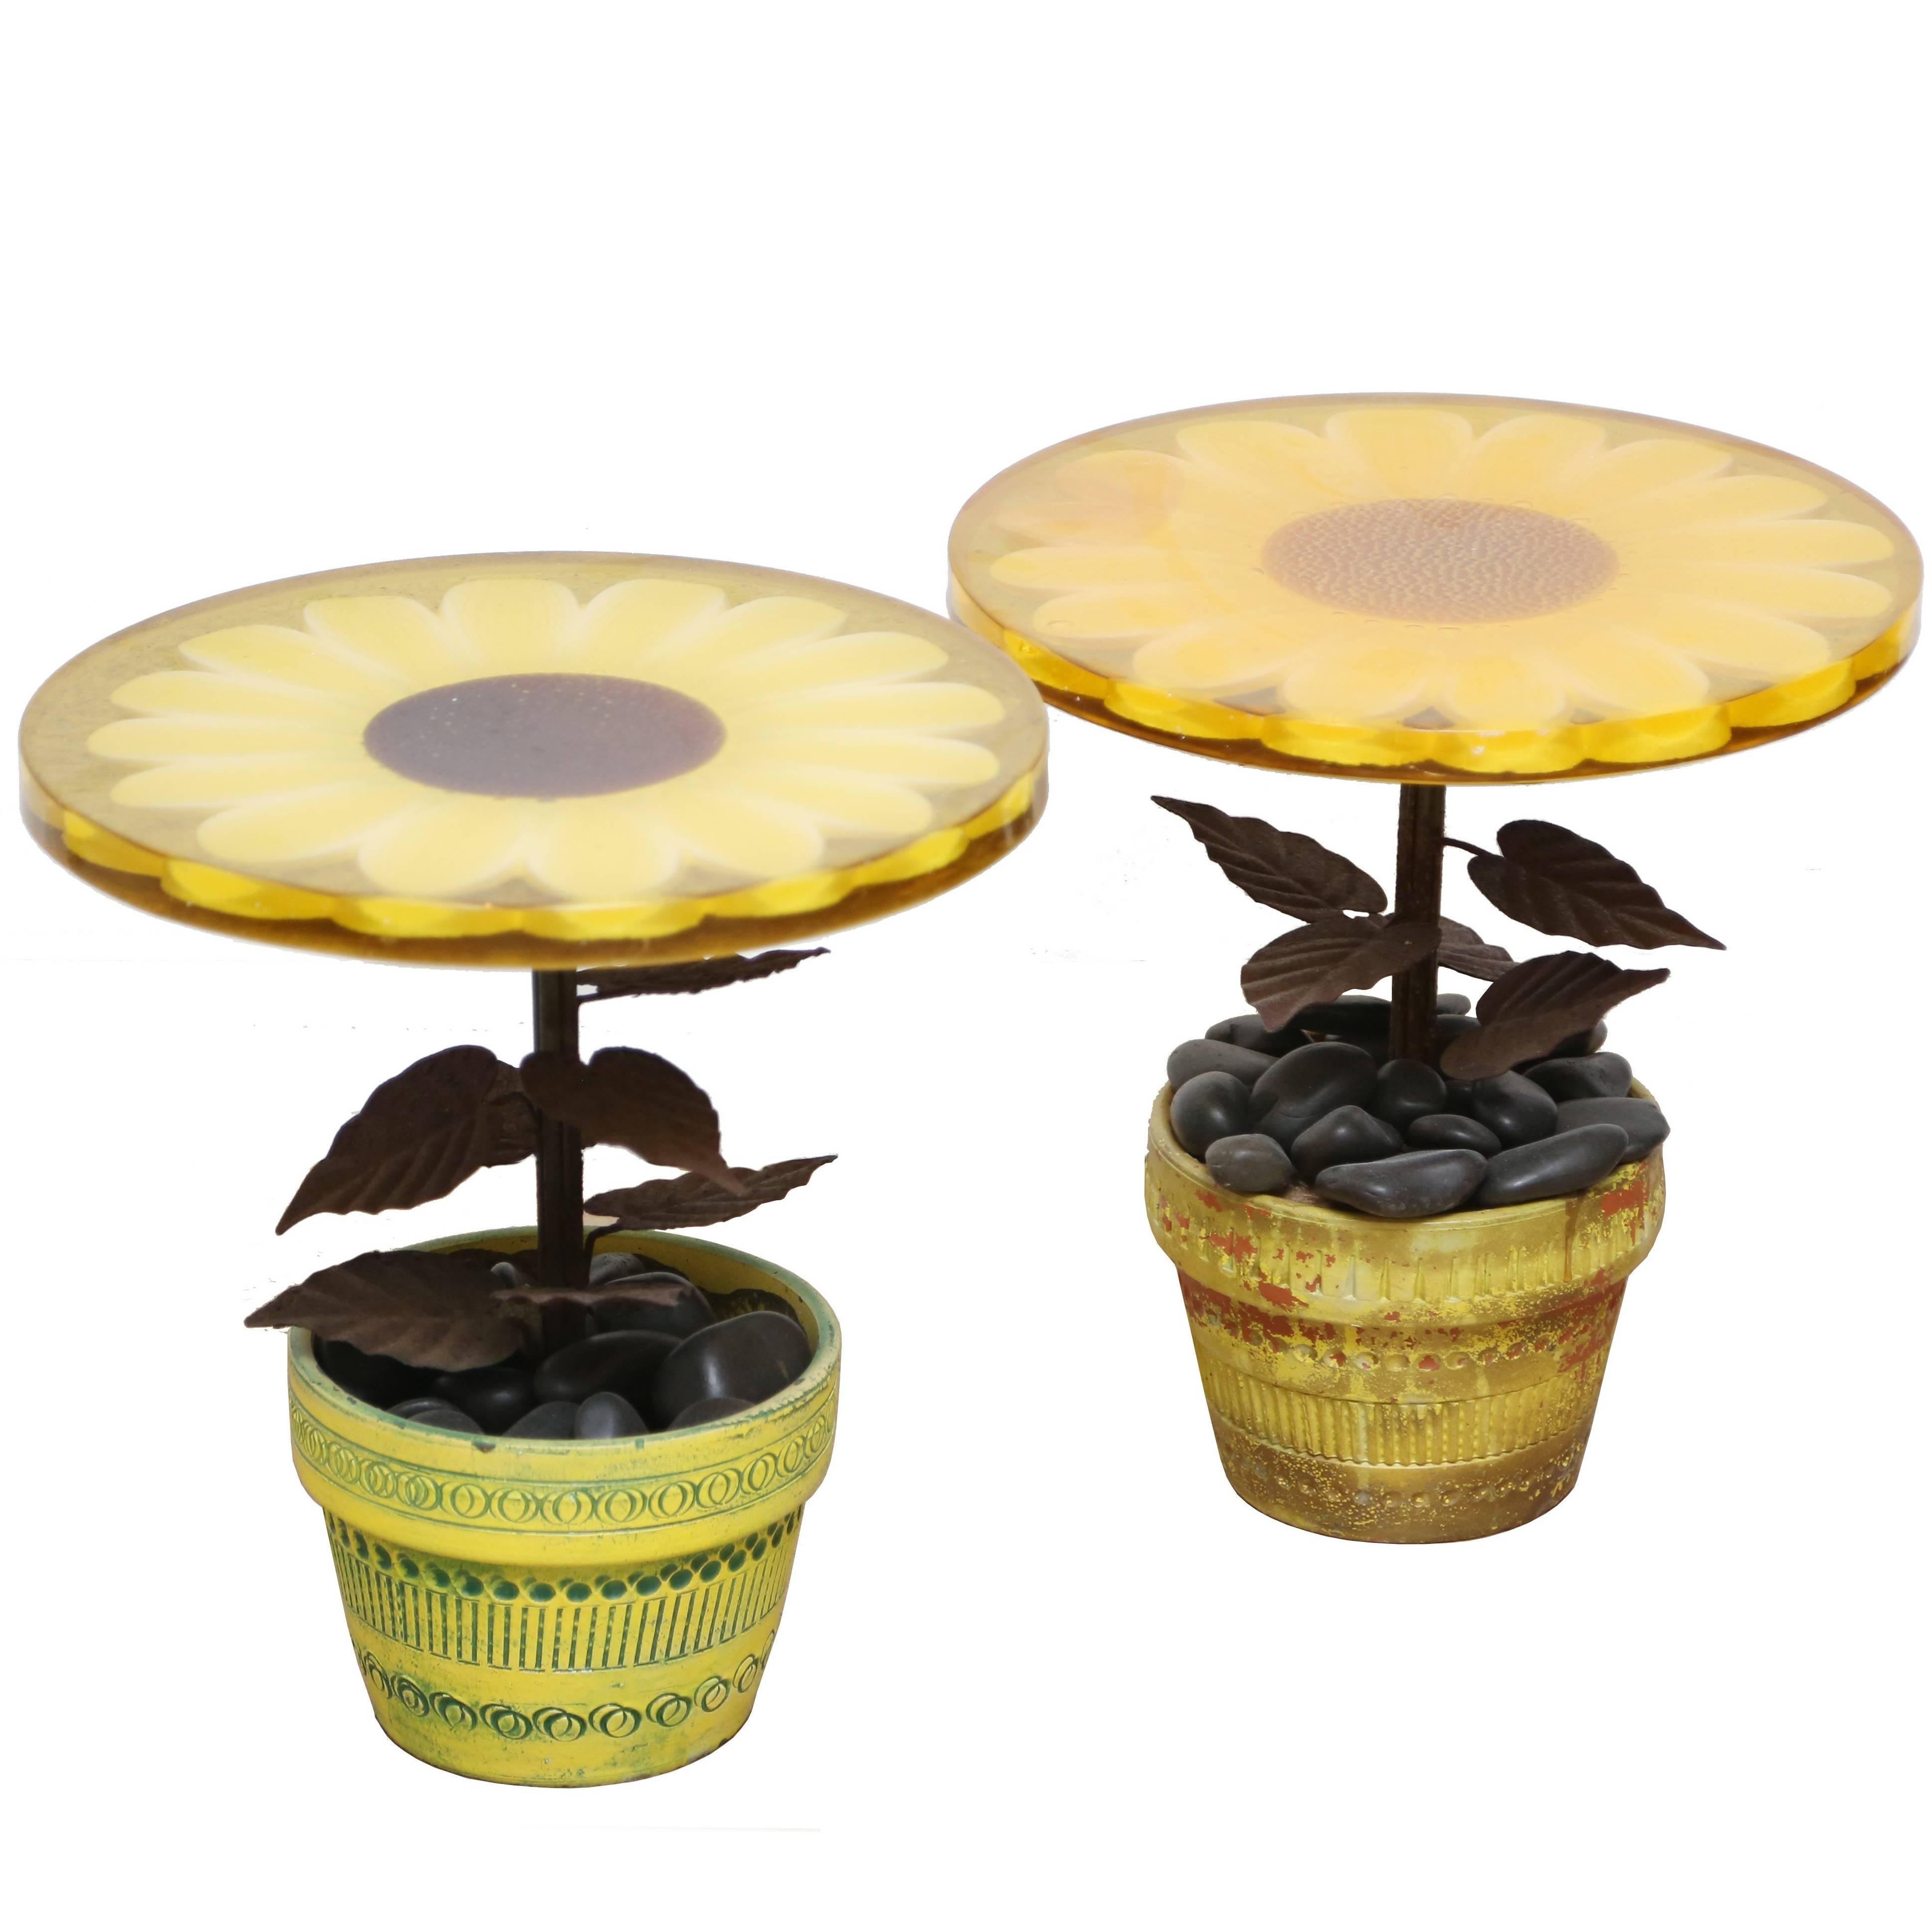 Whimsical pair of side tables with sunflower acrylic tops. Metal stems with leaves mounted on terracotta planters with great distress patina.
FREE SHIPPING: White Glove to Continental US.